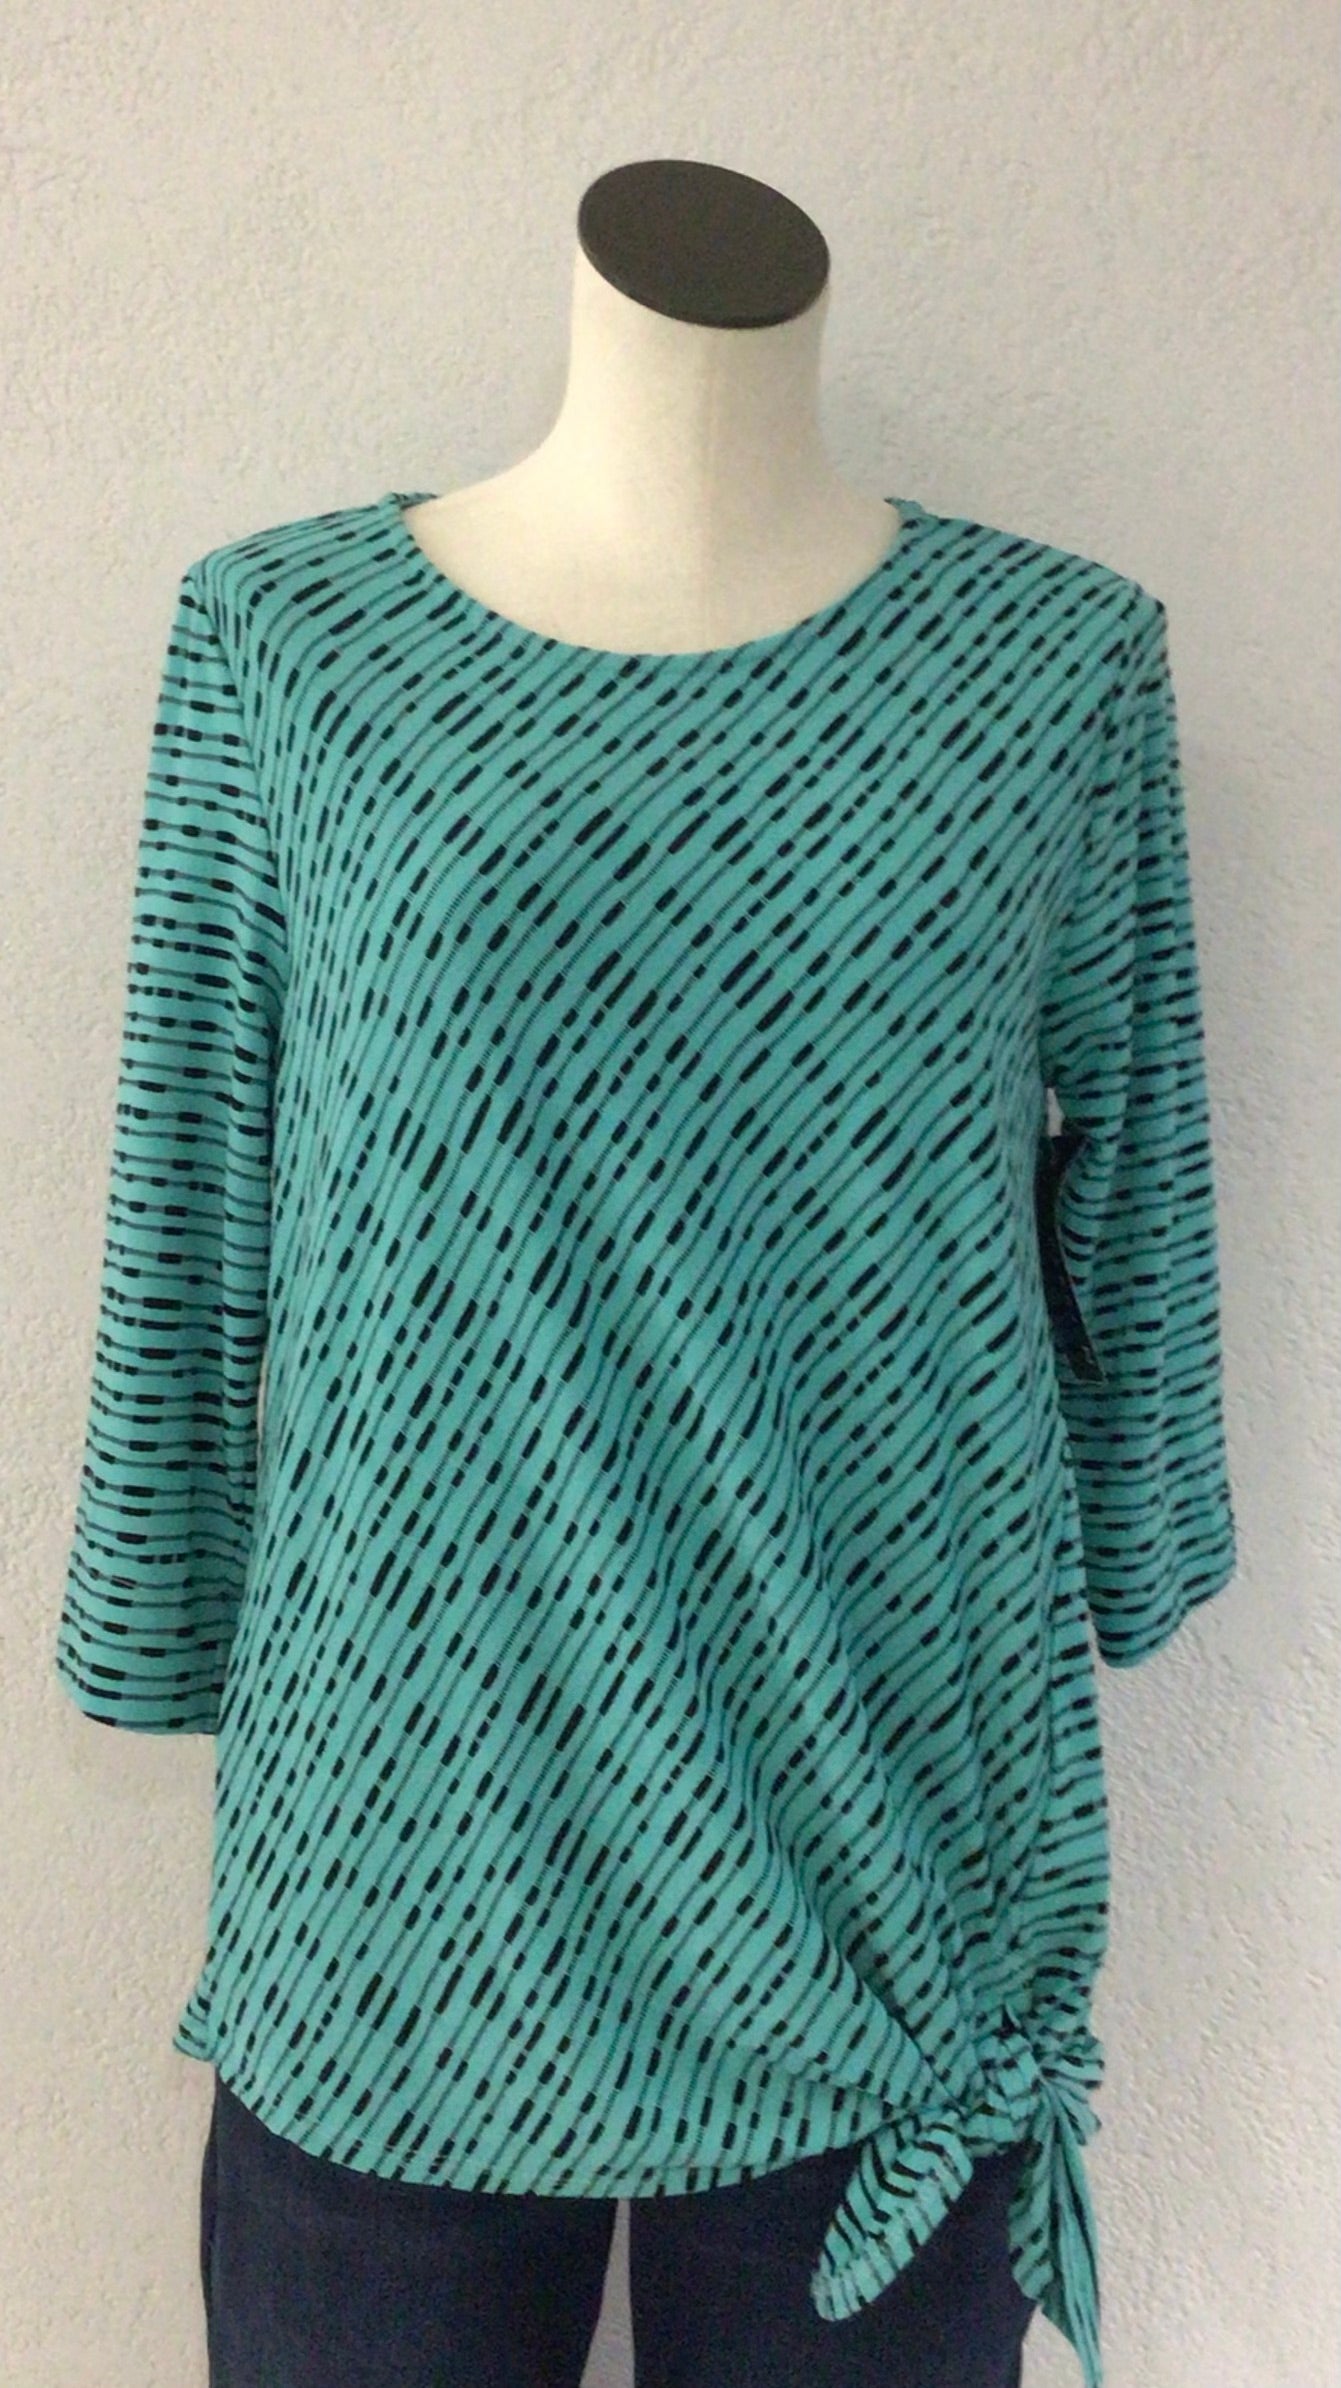 N Touch Aqua and Black Tie Top 455B